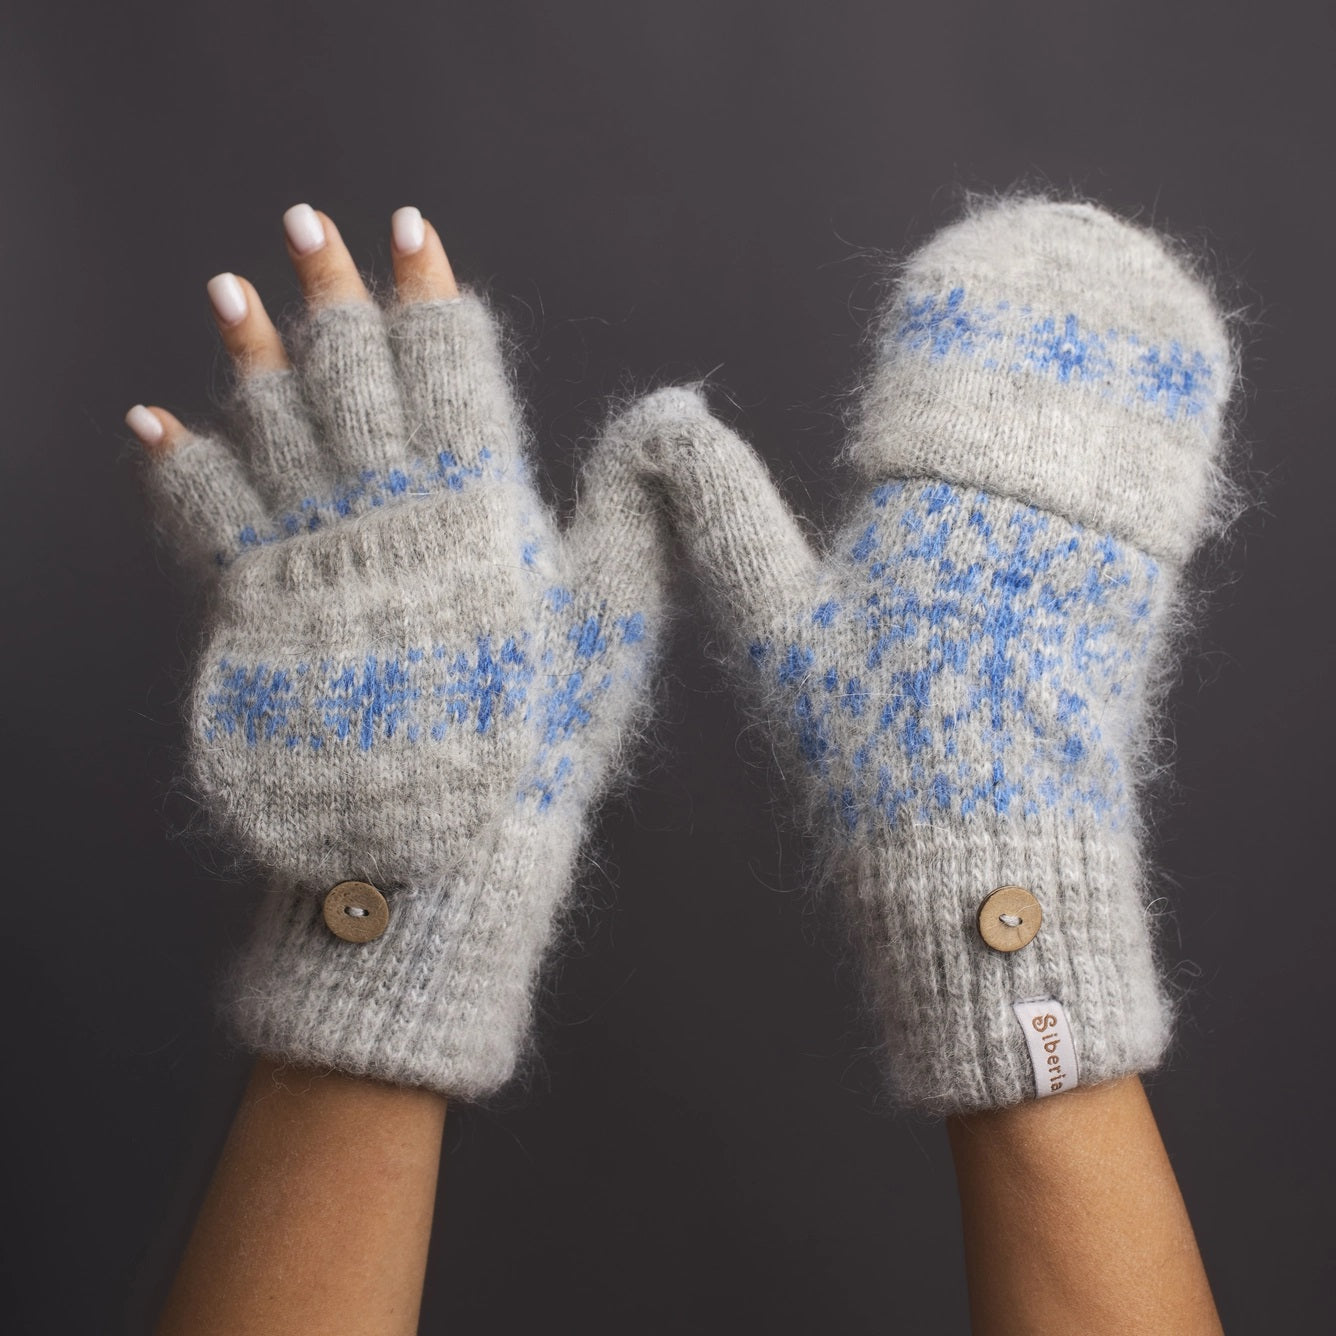 Our Cozy Snow Day Mittens offer luxurious warmth with a vintage vibe. Hand-knit with goat wool, which offer amazing proprieties such as moisture-wicking, order resistance, highly breathable, and ultra-warmth. They feature a soft blue woven snowflake design and a flap so fingertips can be exposed when needed.  Material: 80% soft goat hair, 19% acrylic fibers, 1% other fibers  Length: Wrist to tip of middle finger 10" Thickness: Heavy Weight  Care instructions: Machine wash gentle cycle cool water; air dry 